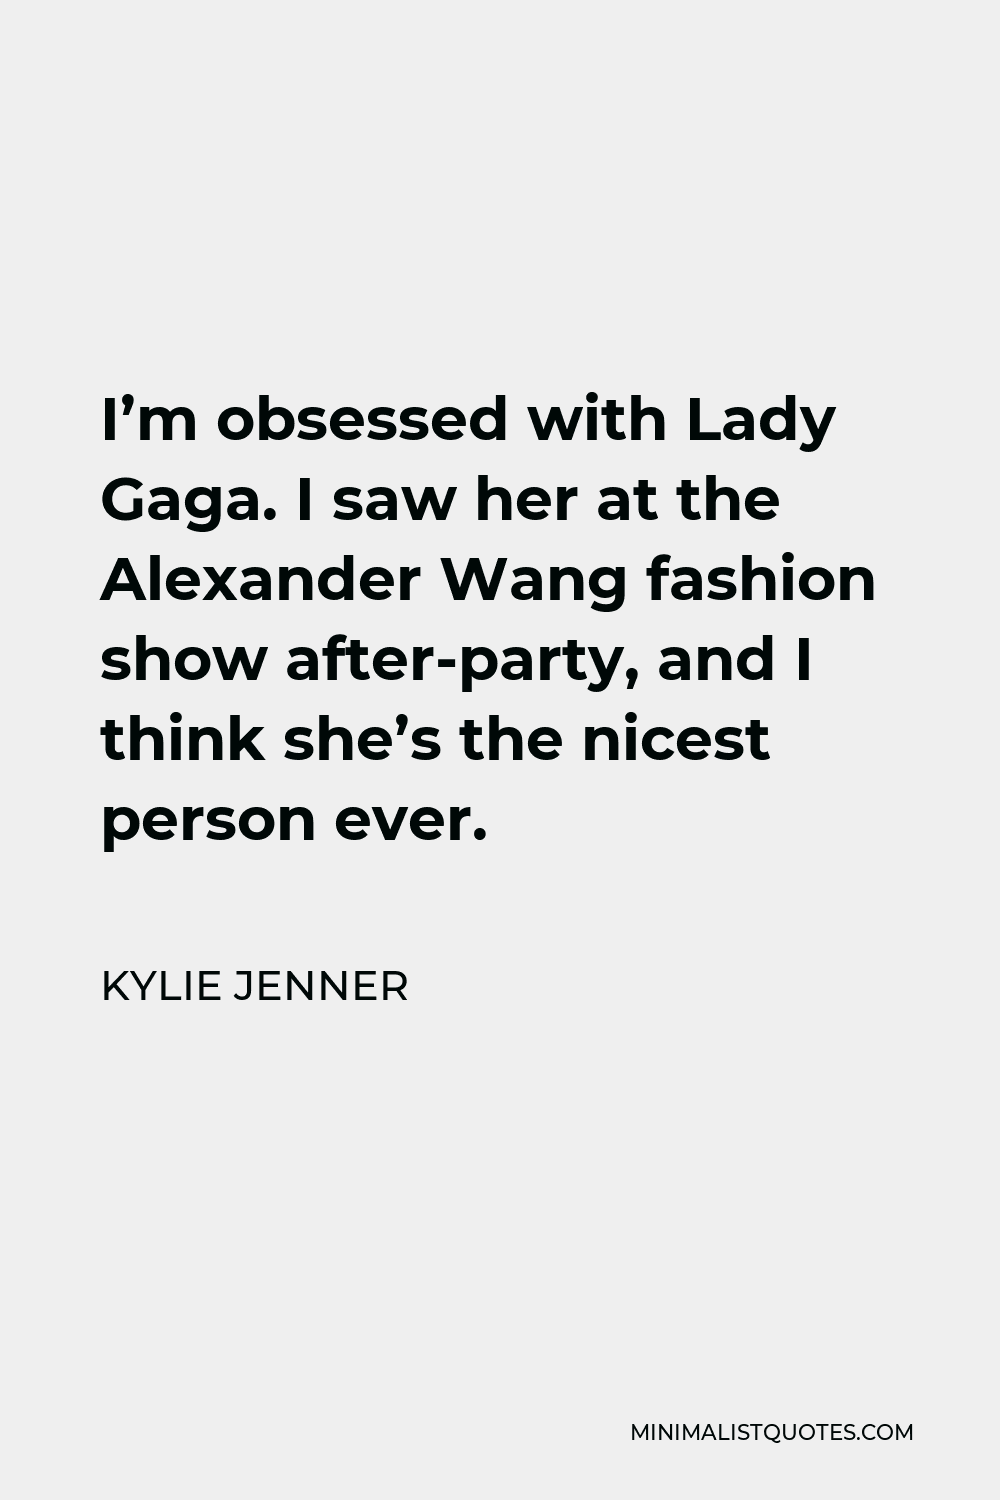 Kylie Jenner Quote - I’m obsessed with Lady Gaga. I saw her at the Alexander Wang fashion show after-party, and I think she’s the nicest person ever.